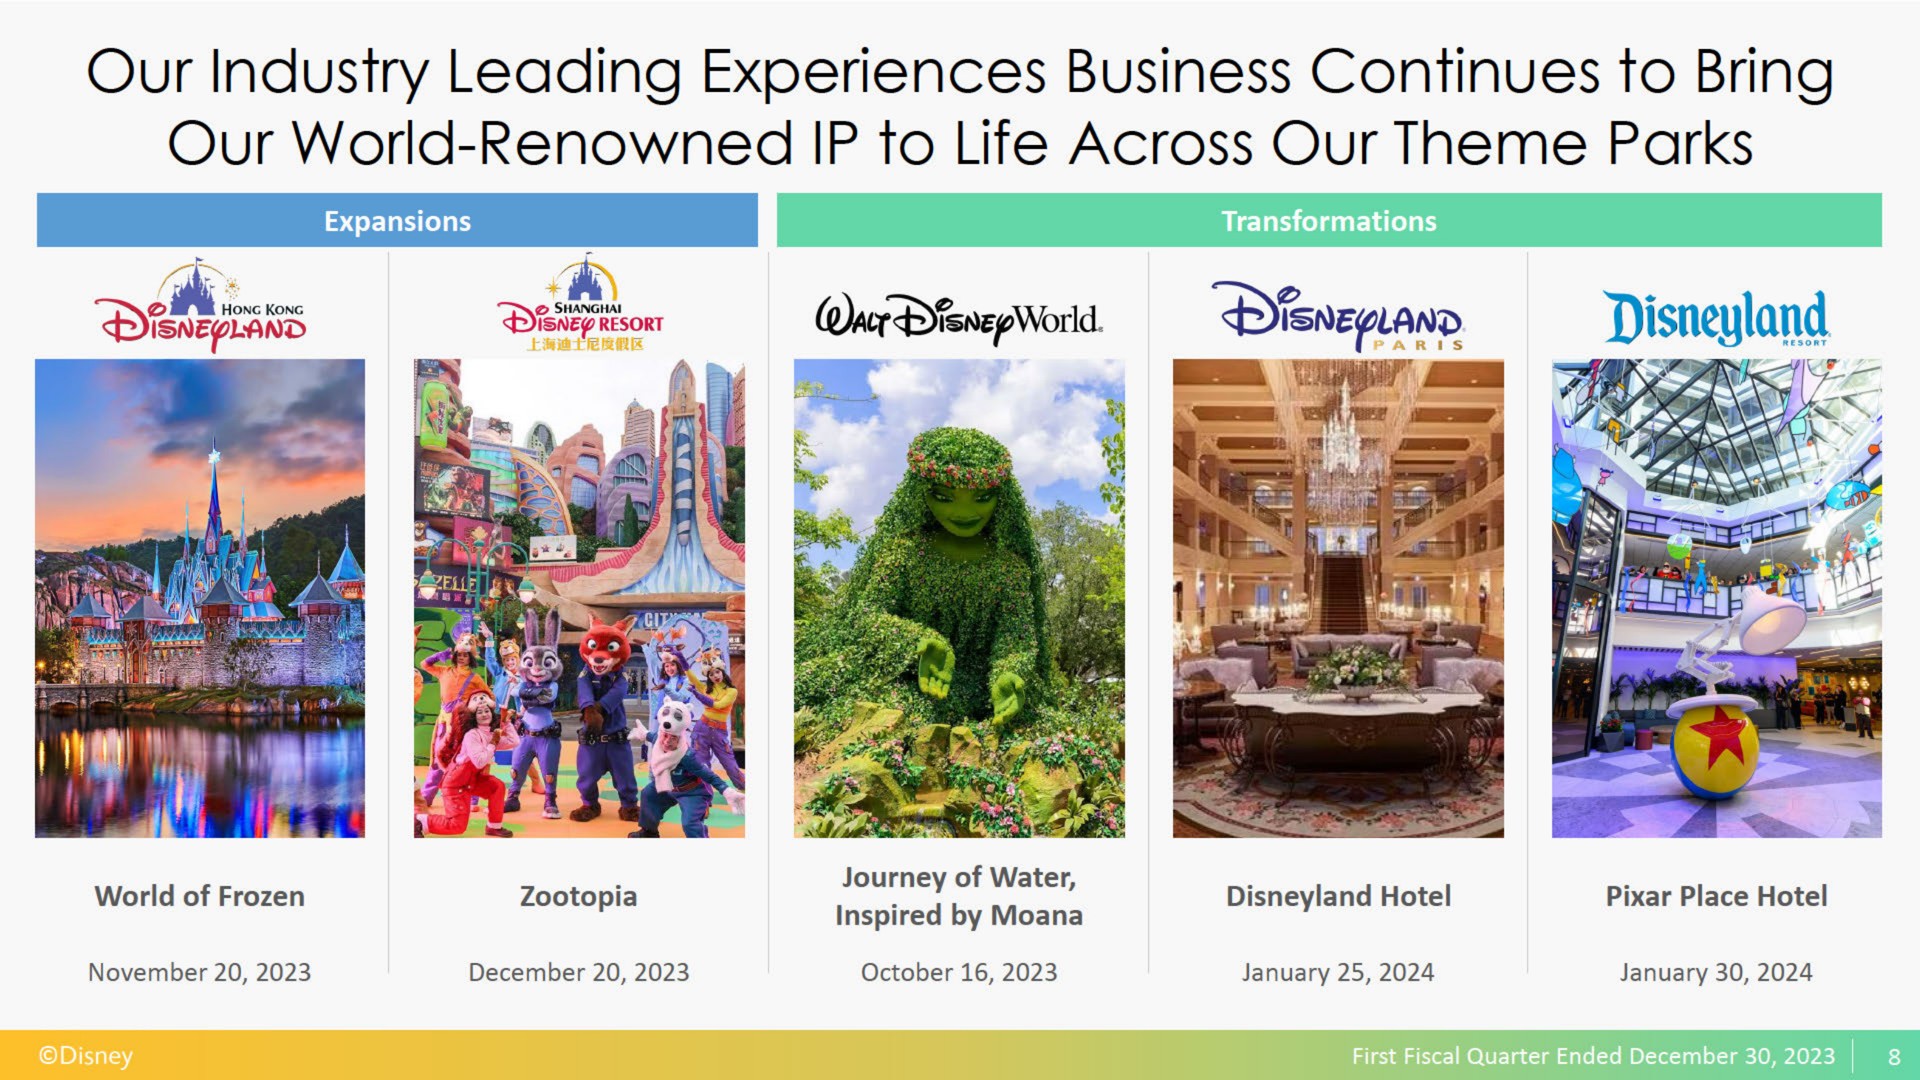 our industry leading experiences business continues bring our world renowned to life across our theme parks | Disney